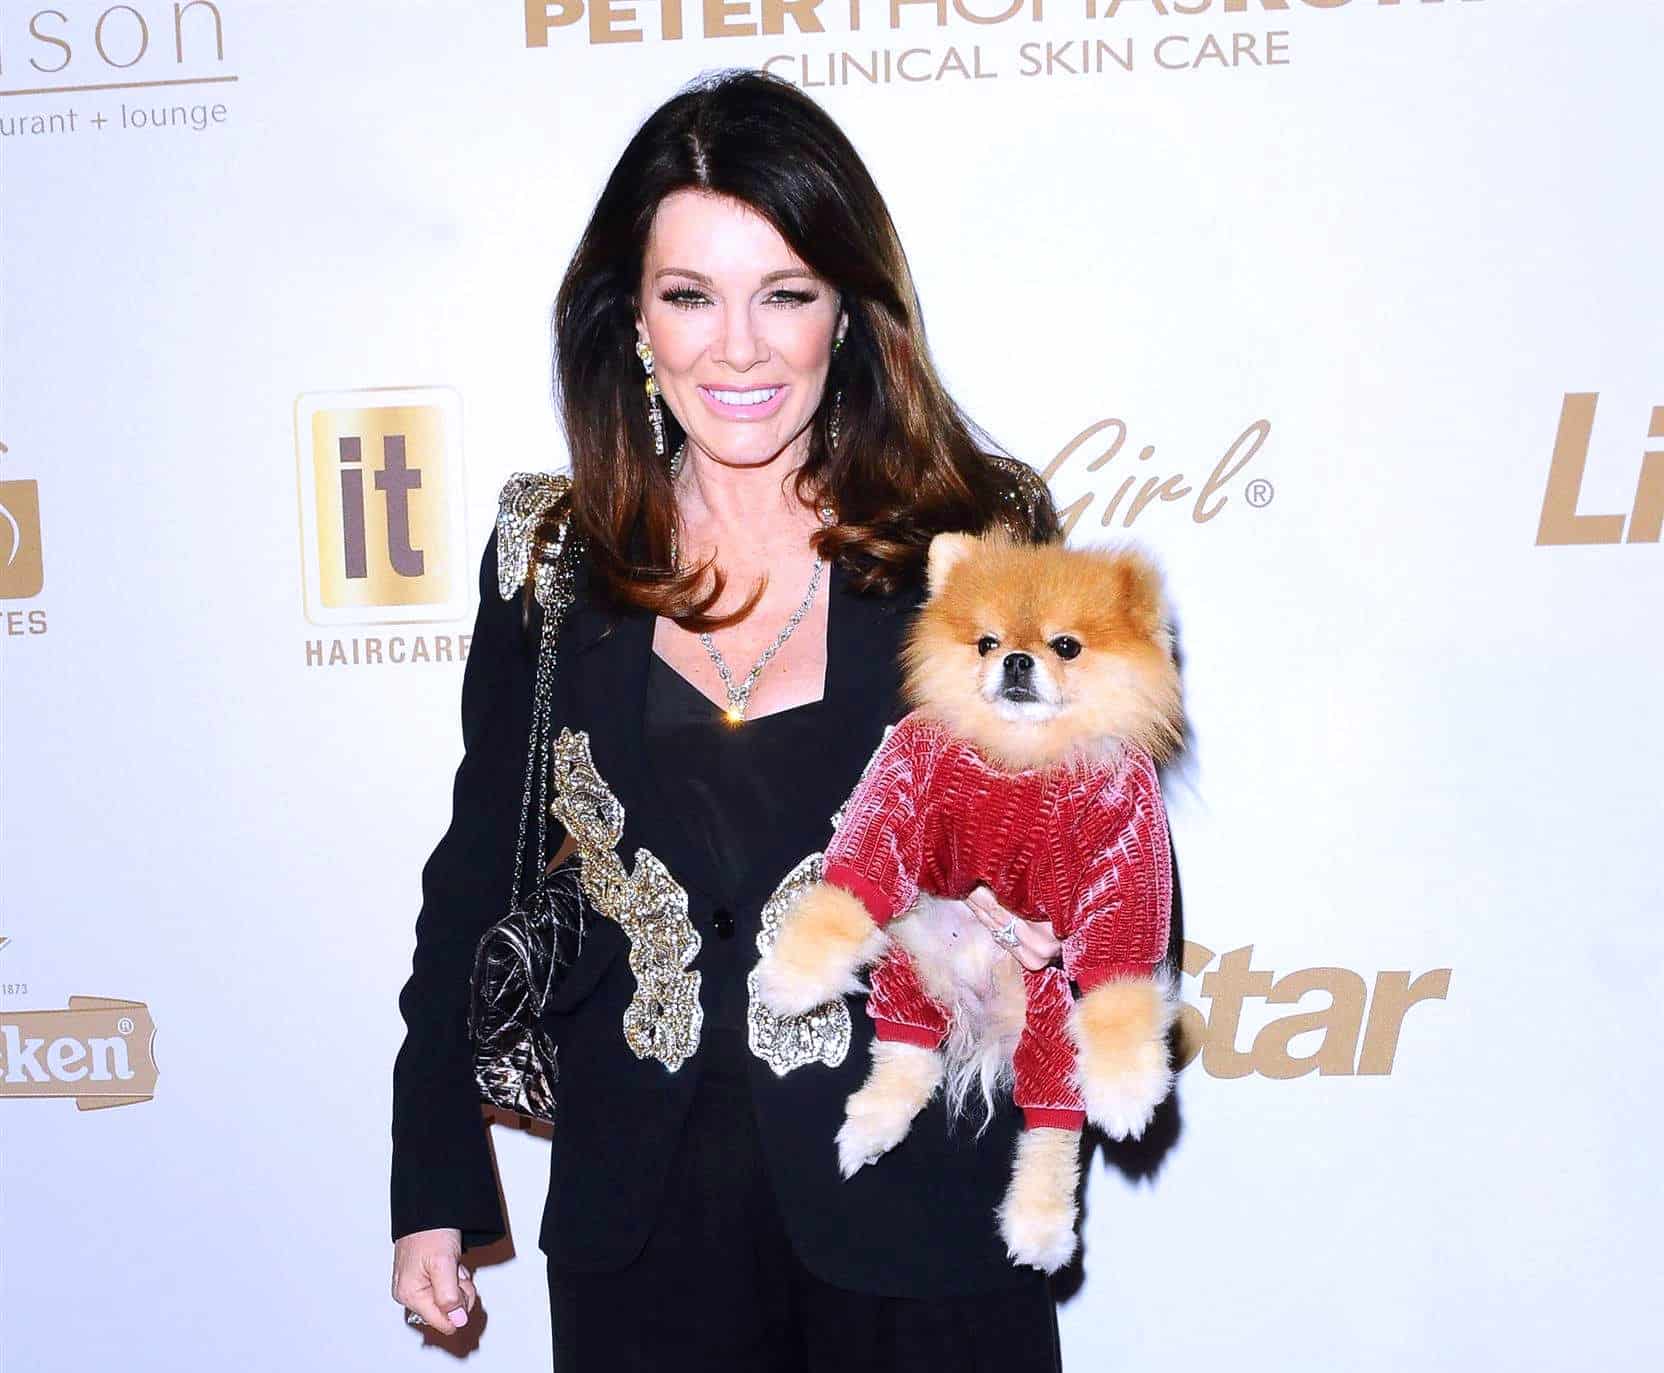 Is Lisa Vanderpump Closing PUMP? Realtor Claims Restaurant is "For Lease" as Rep Denies Liquor License Was Suspended After Weekend Closure